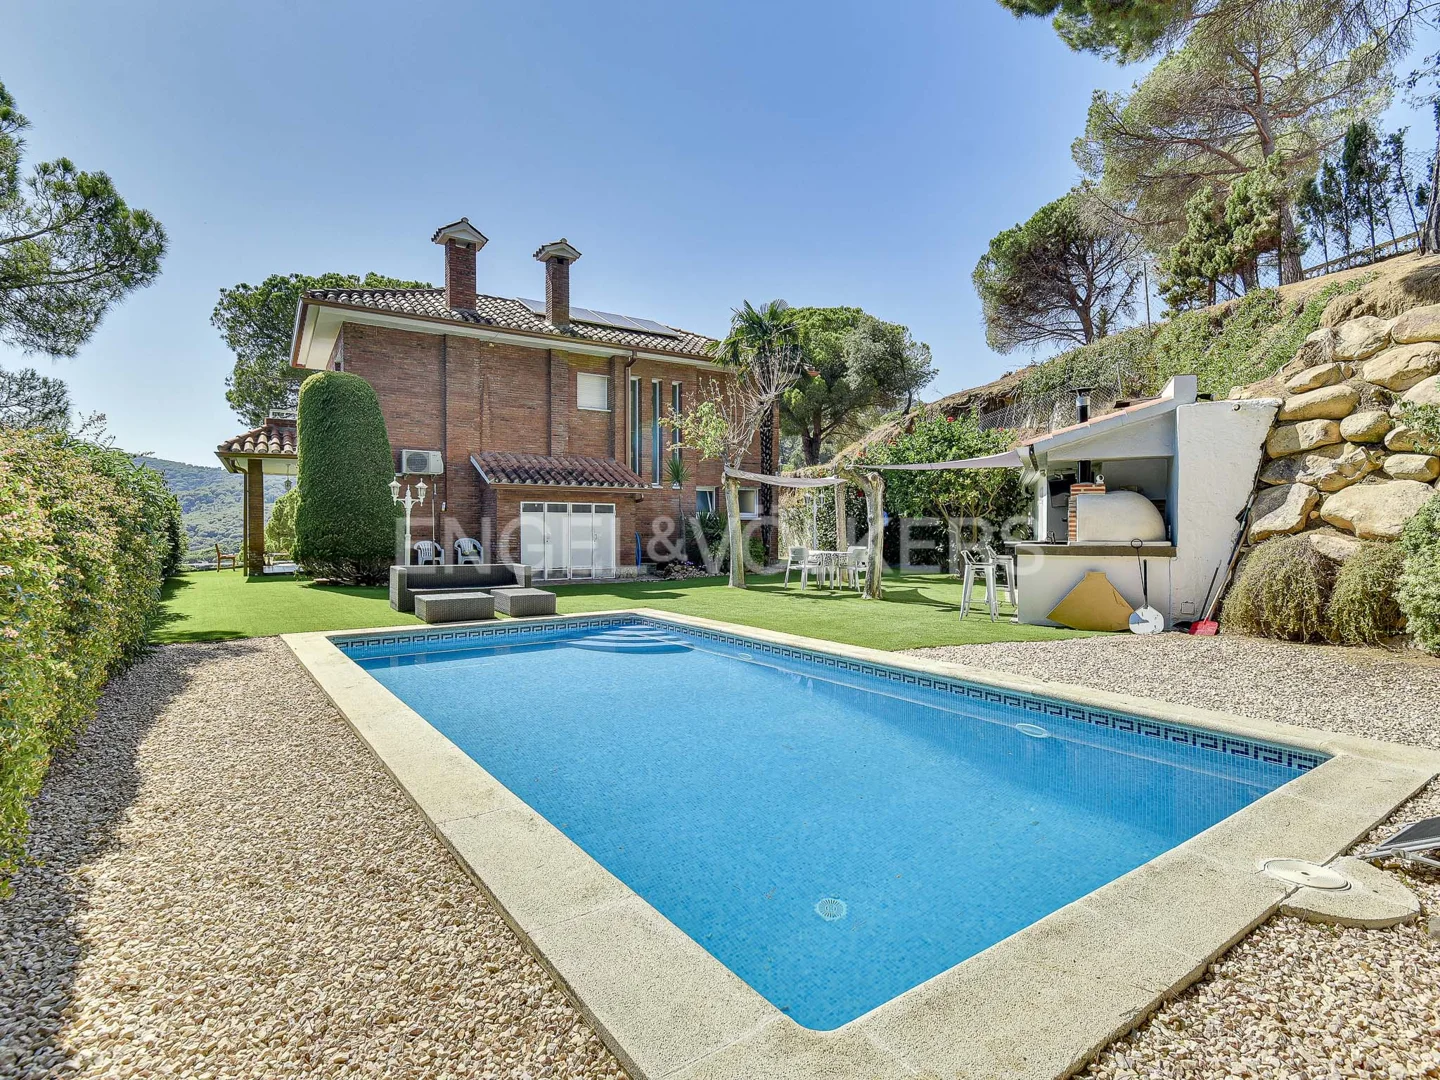 Fantastic location and privacy in Arenys de Munt